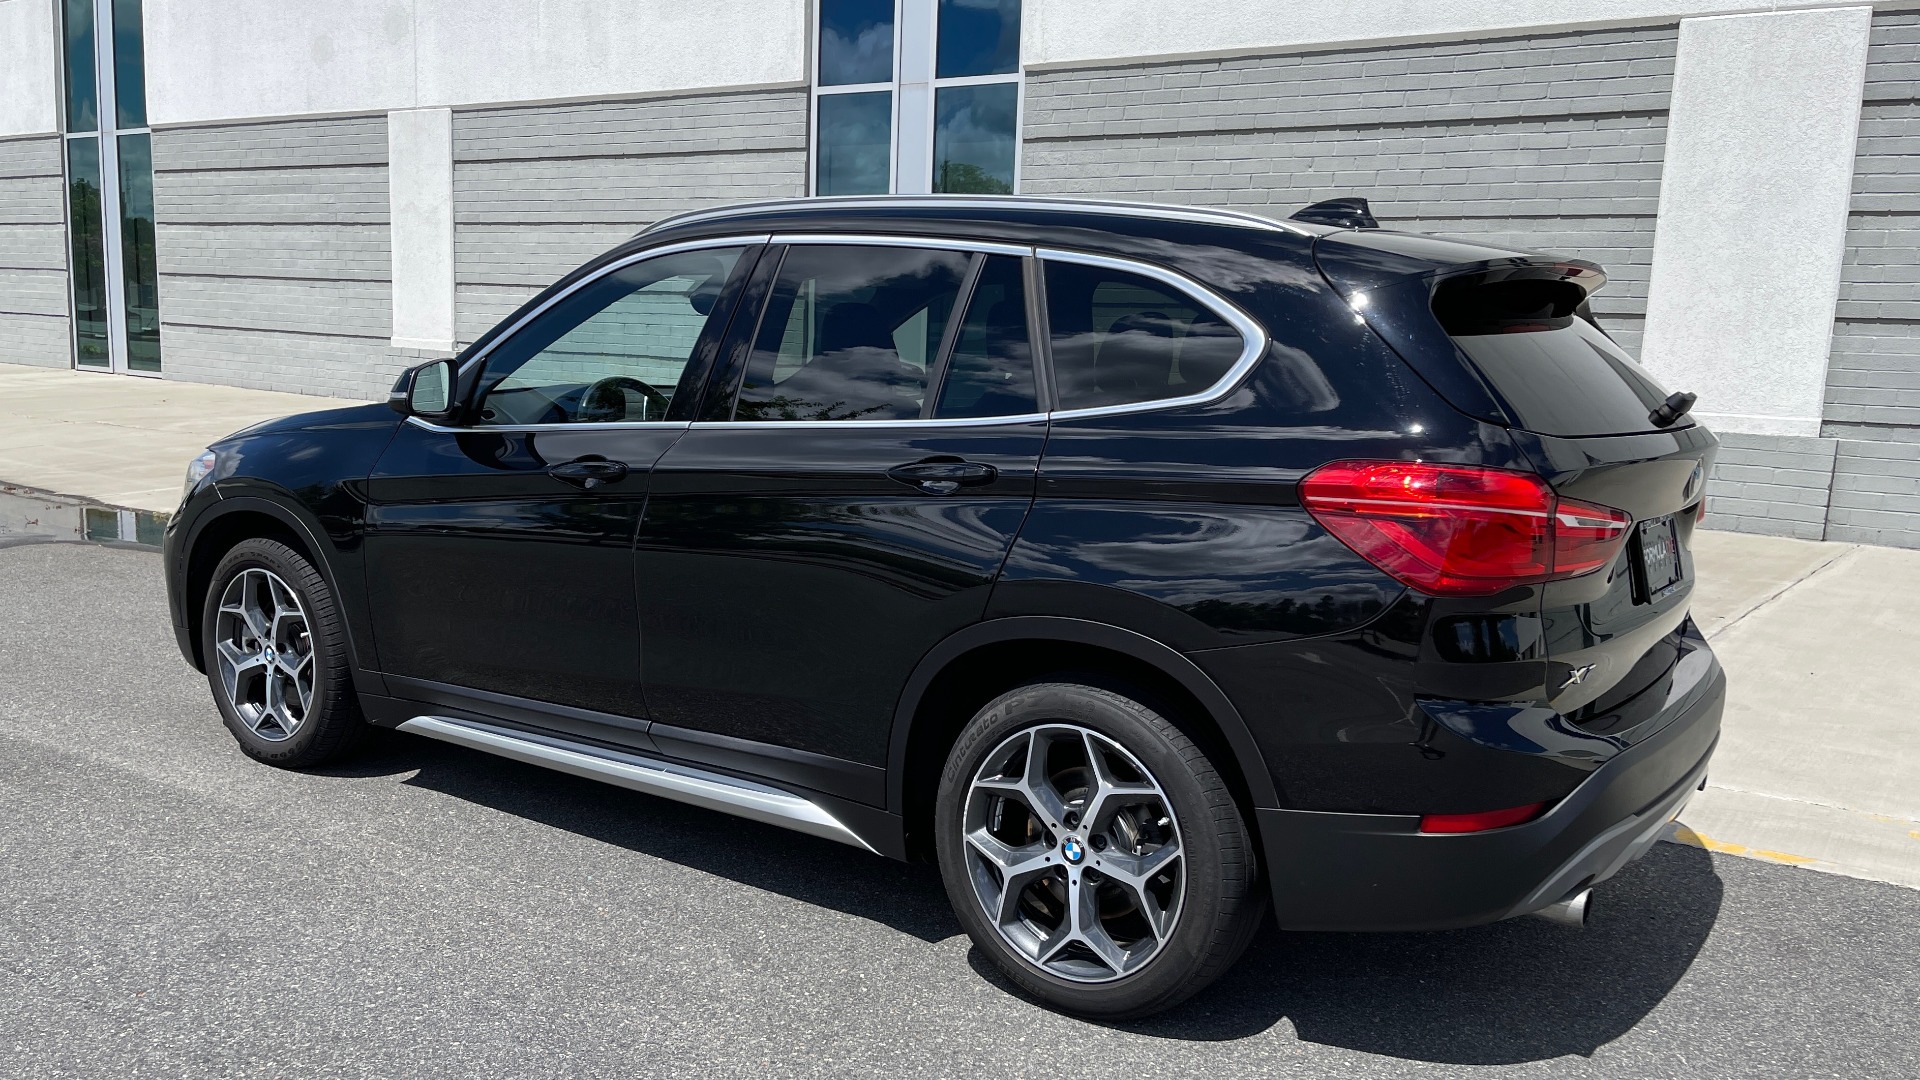 Used 2018 BMW X1 XDRIVE28I / 2.0L / AWD / 8-SPD AUTO / REARVIEW for sale Sold at Formula Imports in Charlotte NC 28227 5